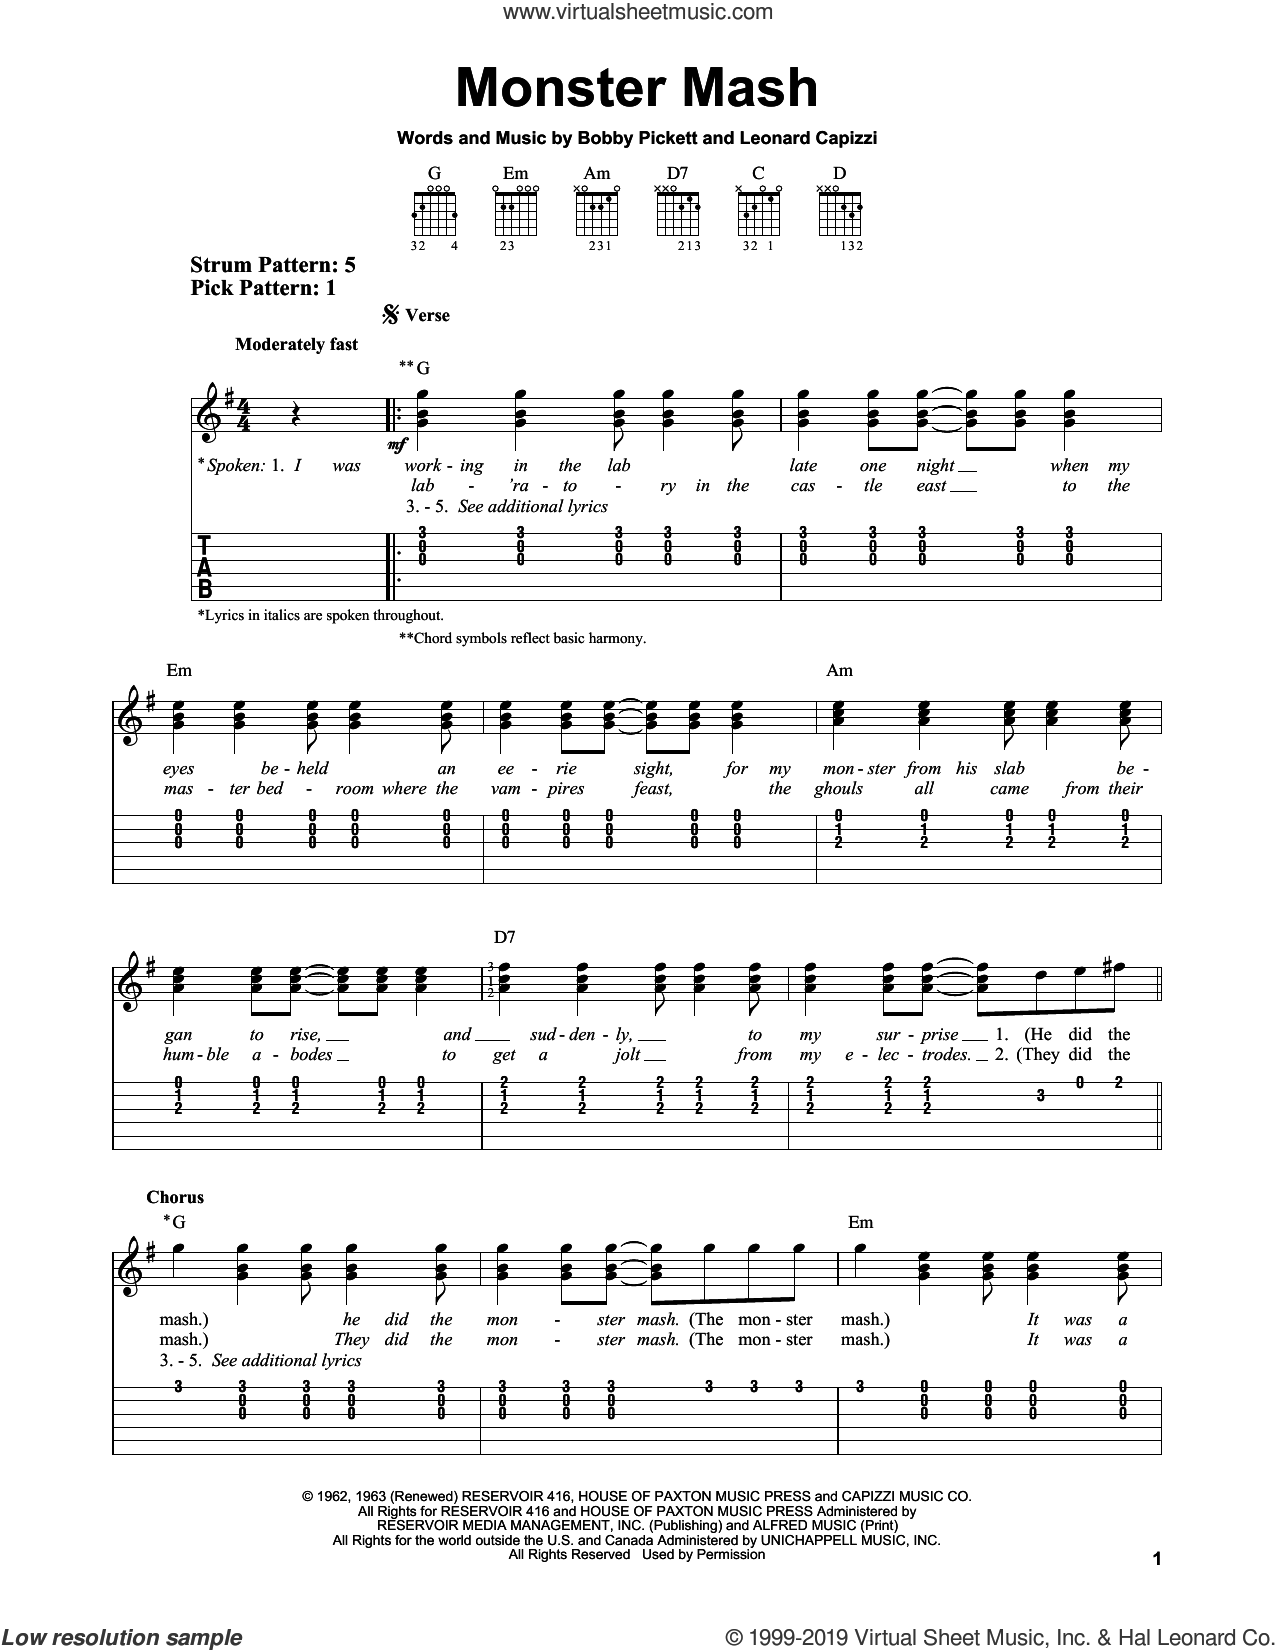 Chords to monster mash